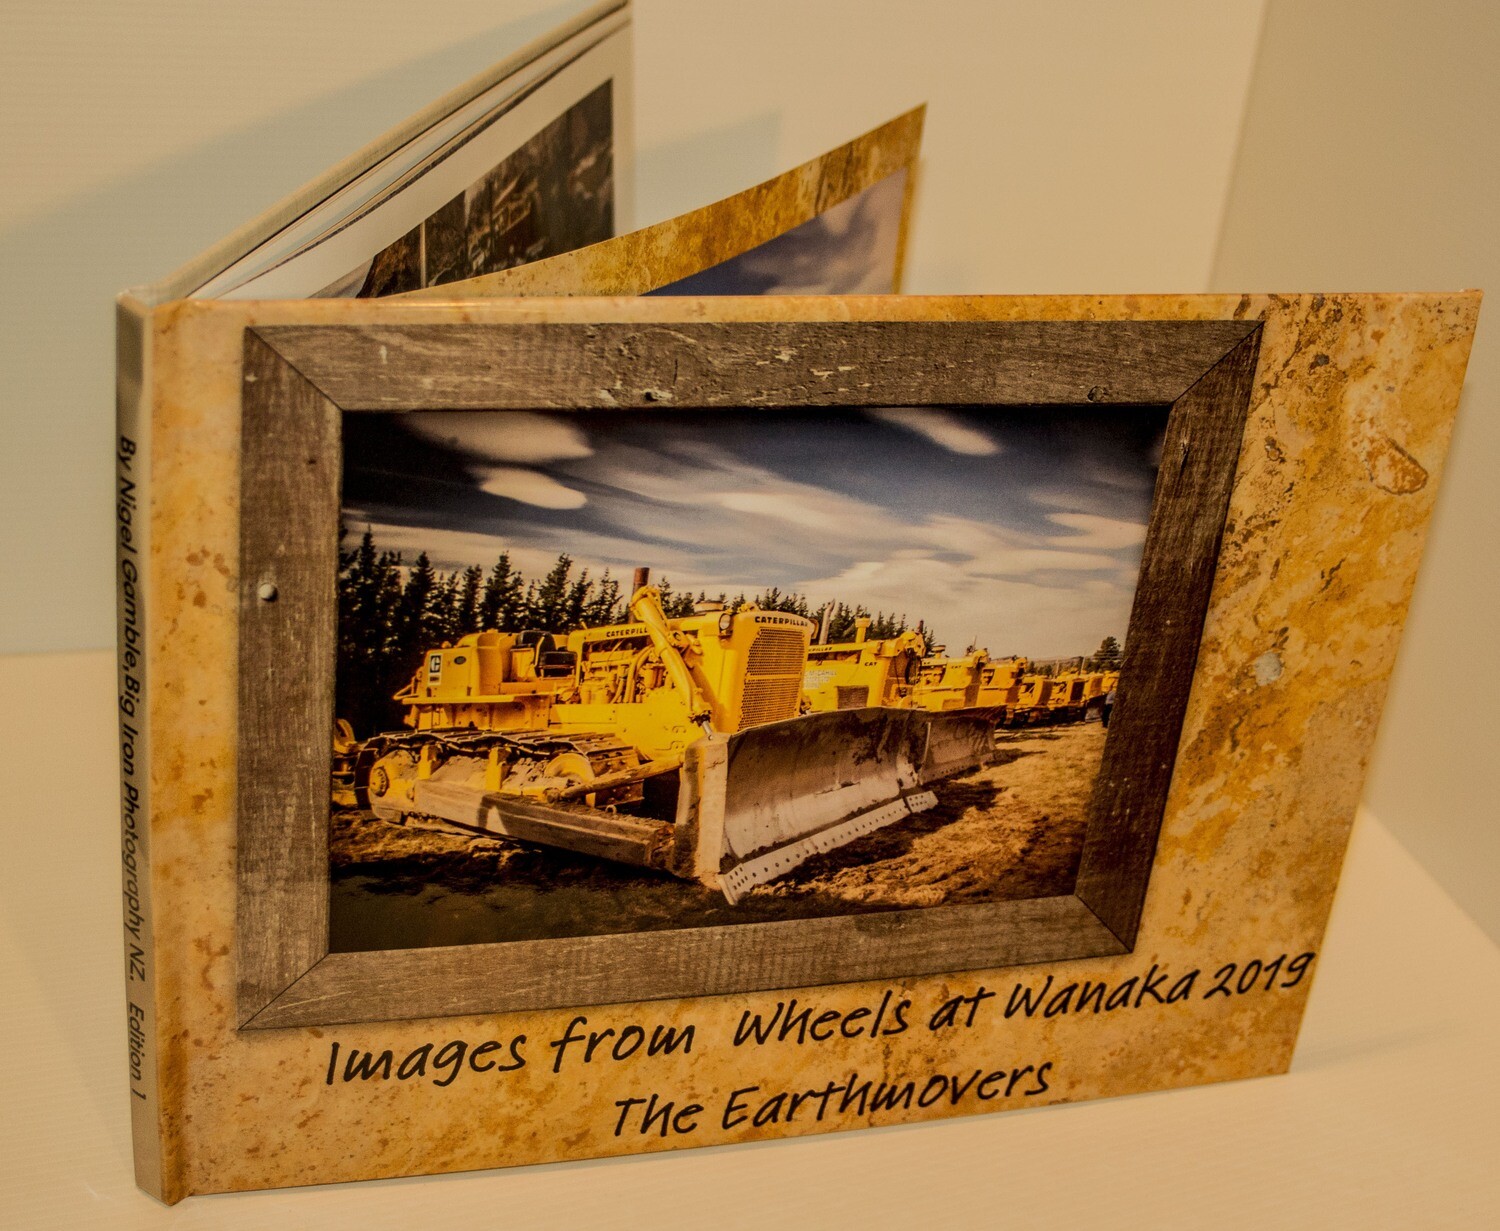 Images from Wheels At Wanaka 2019, The Earthmovers. Edition 1